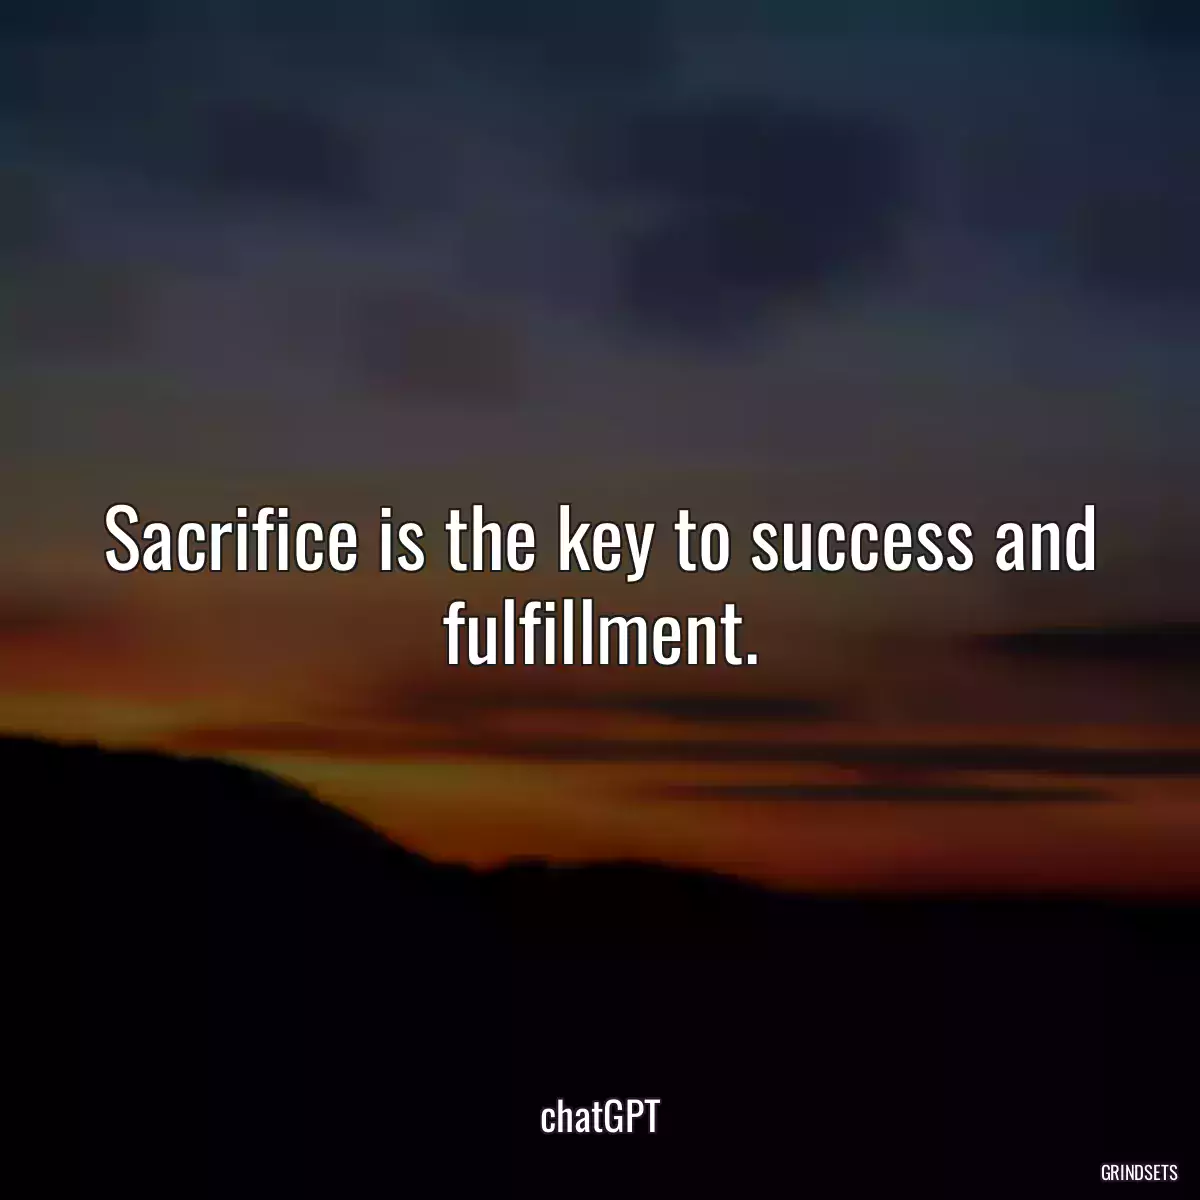 Sacrifice is the key to success and fulfillment.